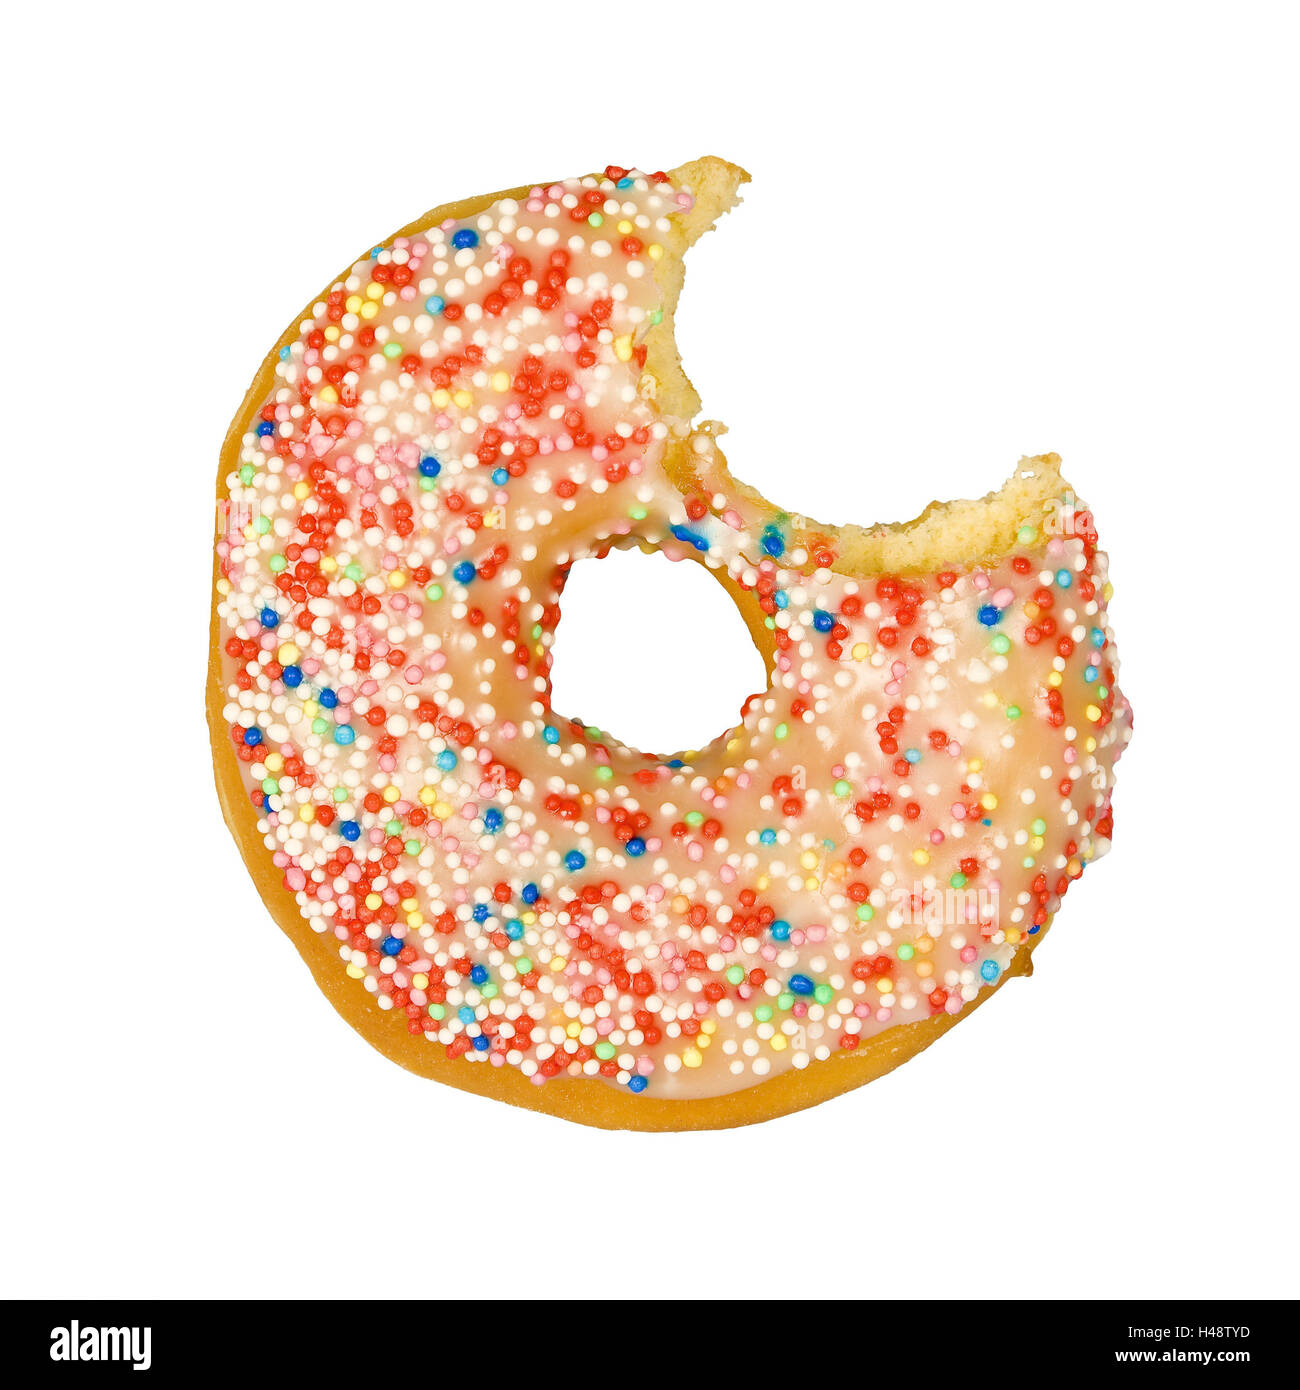 Doughnut, sugar crumble, brightly, bitten into, cake, in American manner, typically, cakes and pastries, Nascherei, nibble, sweetness, sweetly, tasty, crumble, ring-shaped, hole, sugar, background, white, cut out, Food, Stock Photo